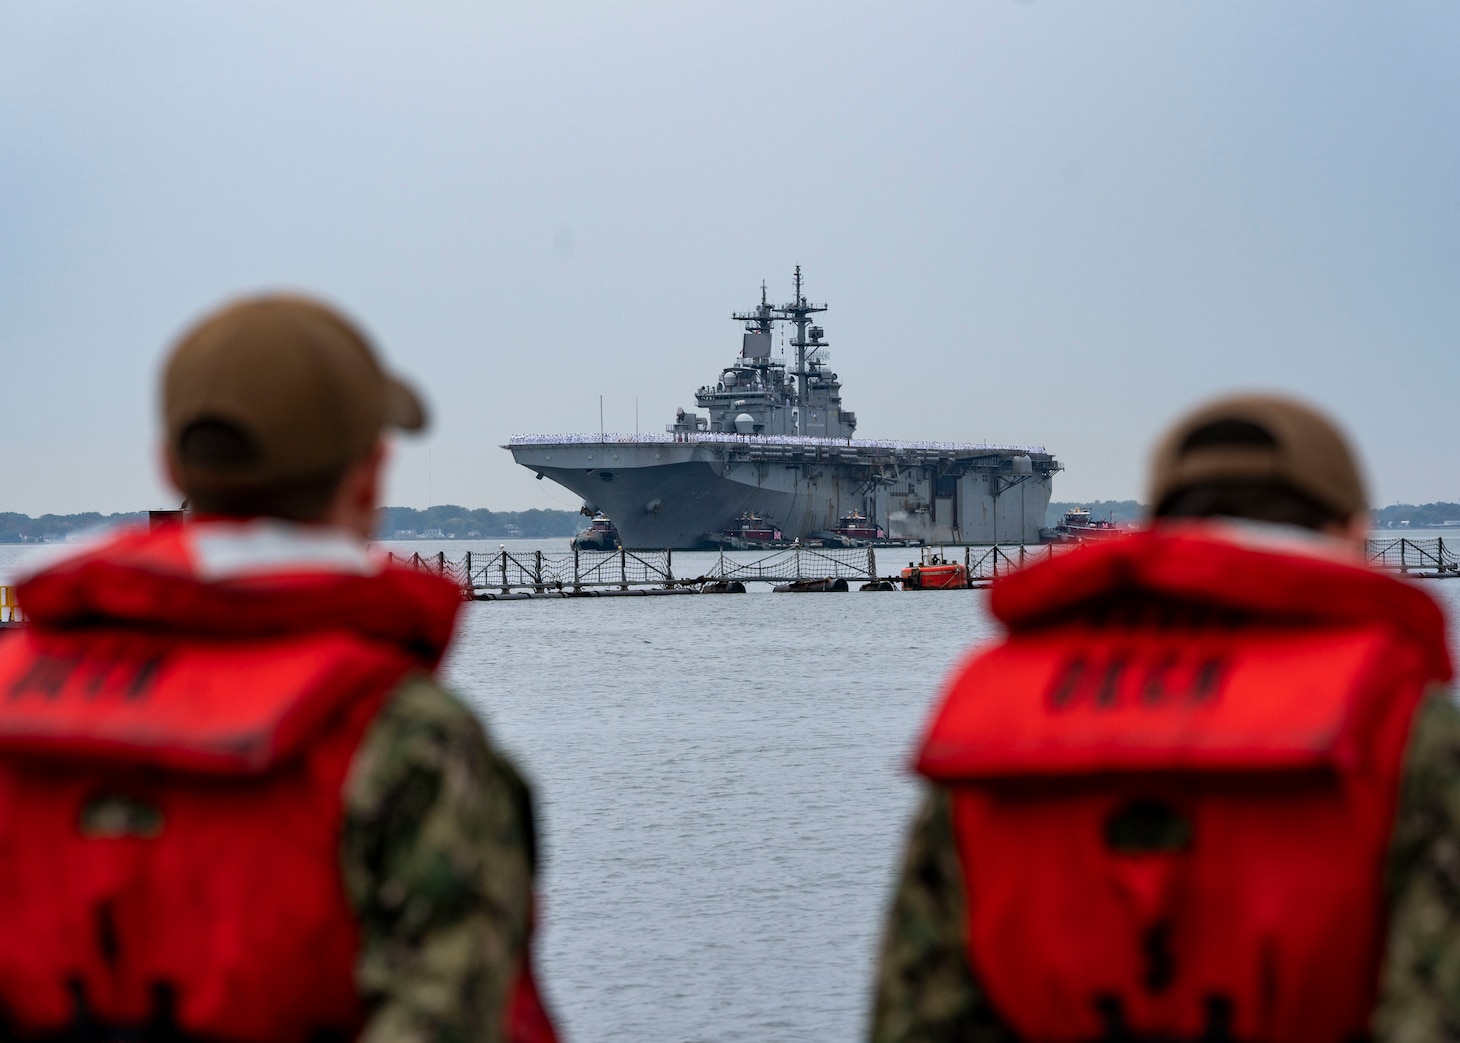 NORFOLK (Oct. 13, 2022) – The Wasp-class amphibious assault ship USS Kearsarge (LHD 3), returns to Naval Station Norfolk after a seven-month deployment, Oct. 13. More than 4,000 Sailors and Marines assigned to the Kearsarge Amphibious Ready Group (ARG) supported a wide range of interoperability opportunities and exercises across the U.S. Sixth Fleet area of operations increasing combat readiness and crisis response capabilities while strengthening relationships with both NATO Allies and partners. (U.S. Navy Photo by Mass Communication Specialist 2nd Class Nathan T. Beard)